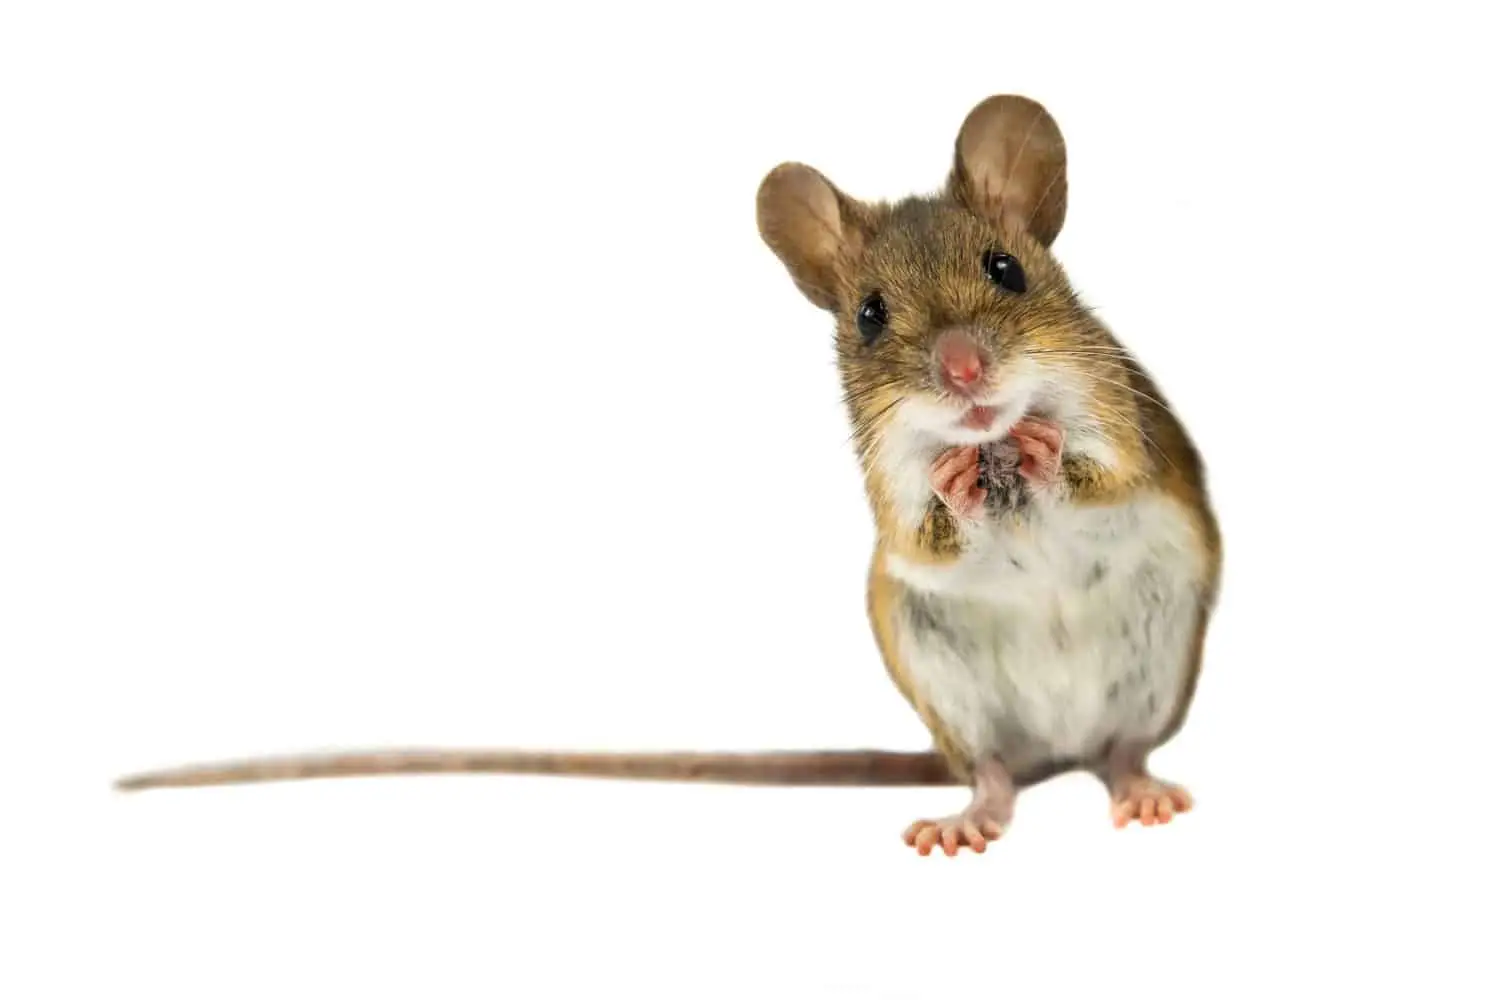 How To Keep Mice Out Of Camper Or RV